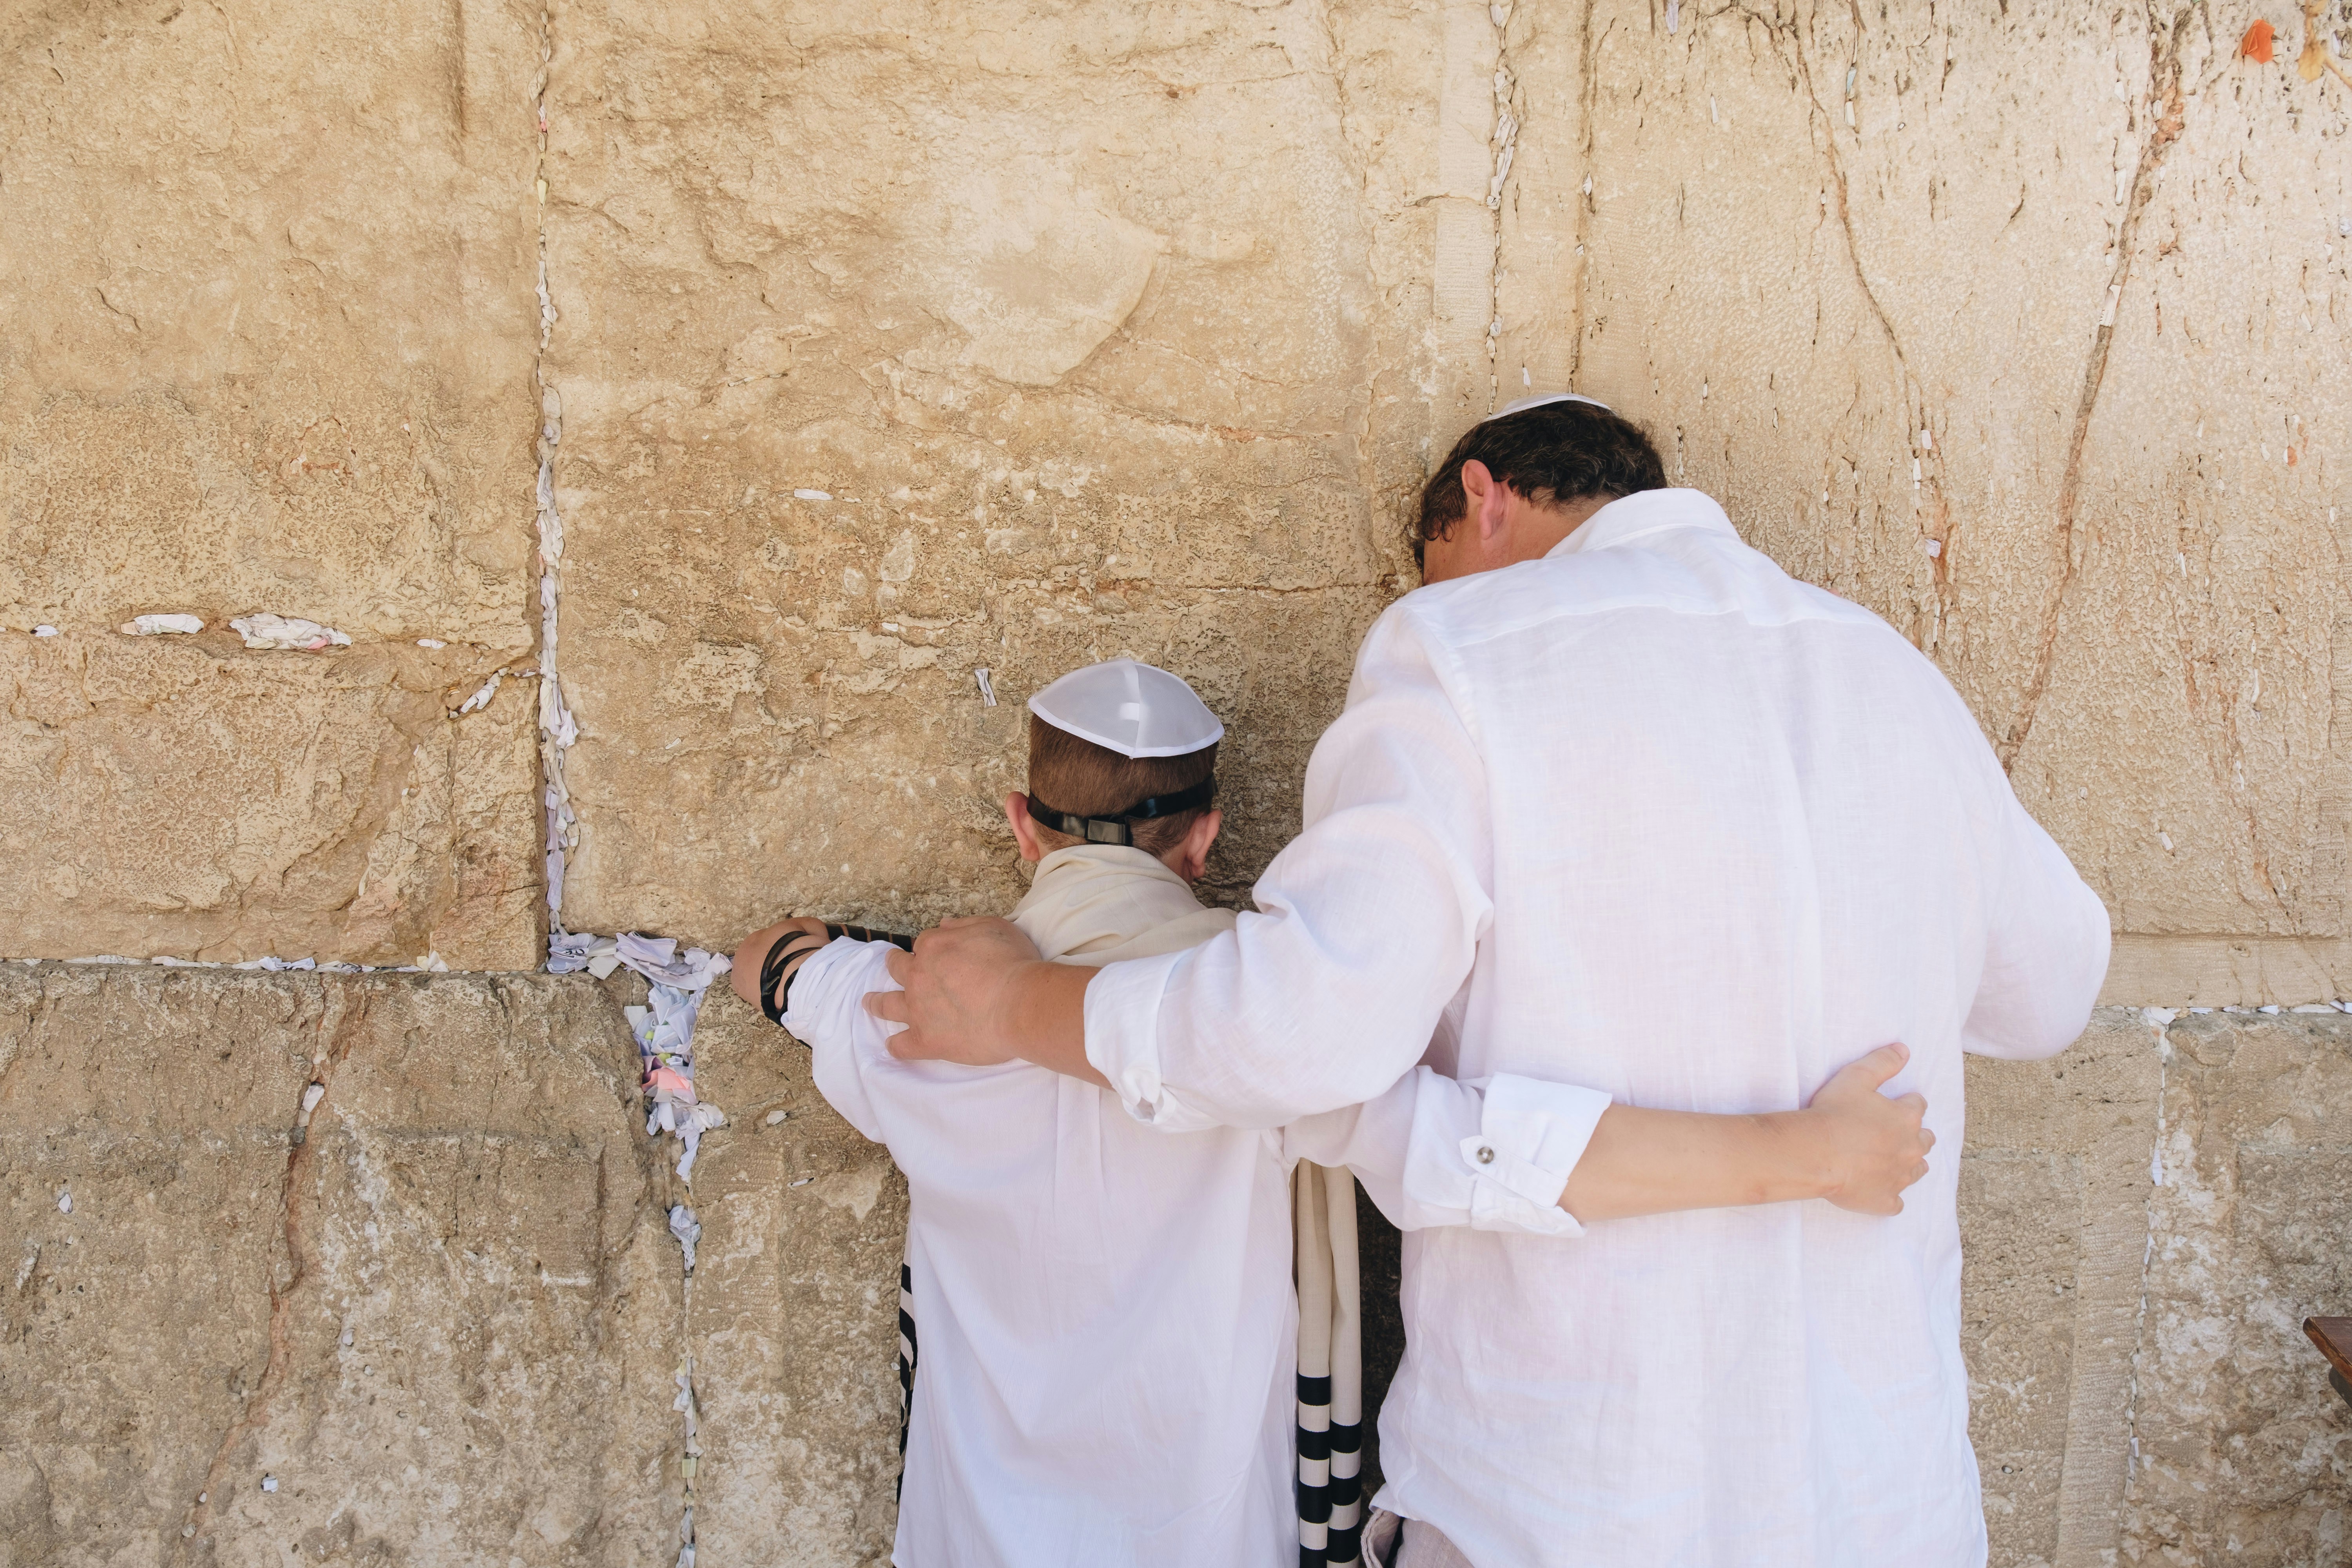 photography and video for bar mitzvah in Jerusalem and Israel http://antonmislawsky.com/barmitzvah